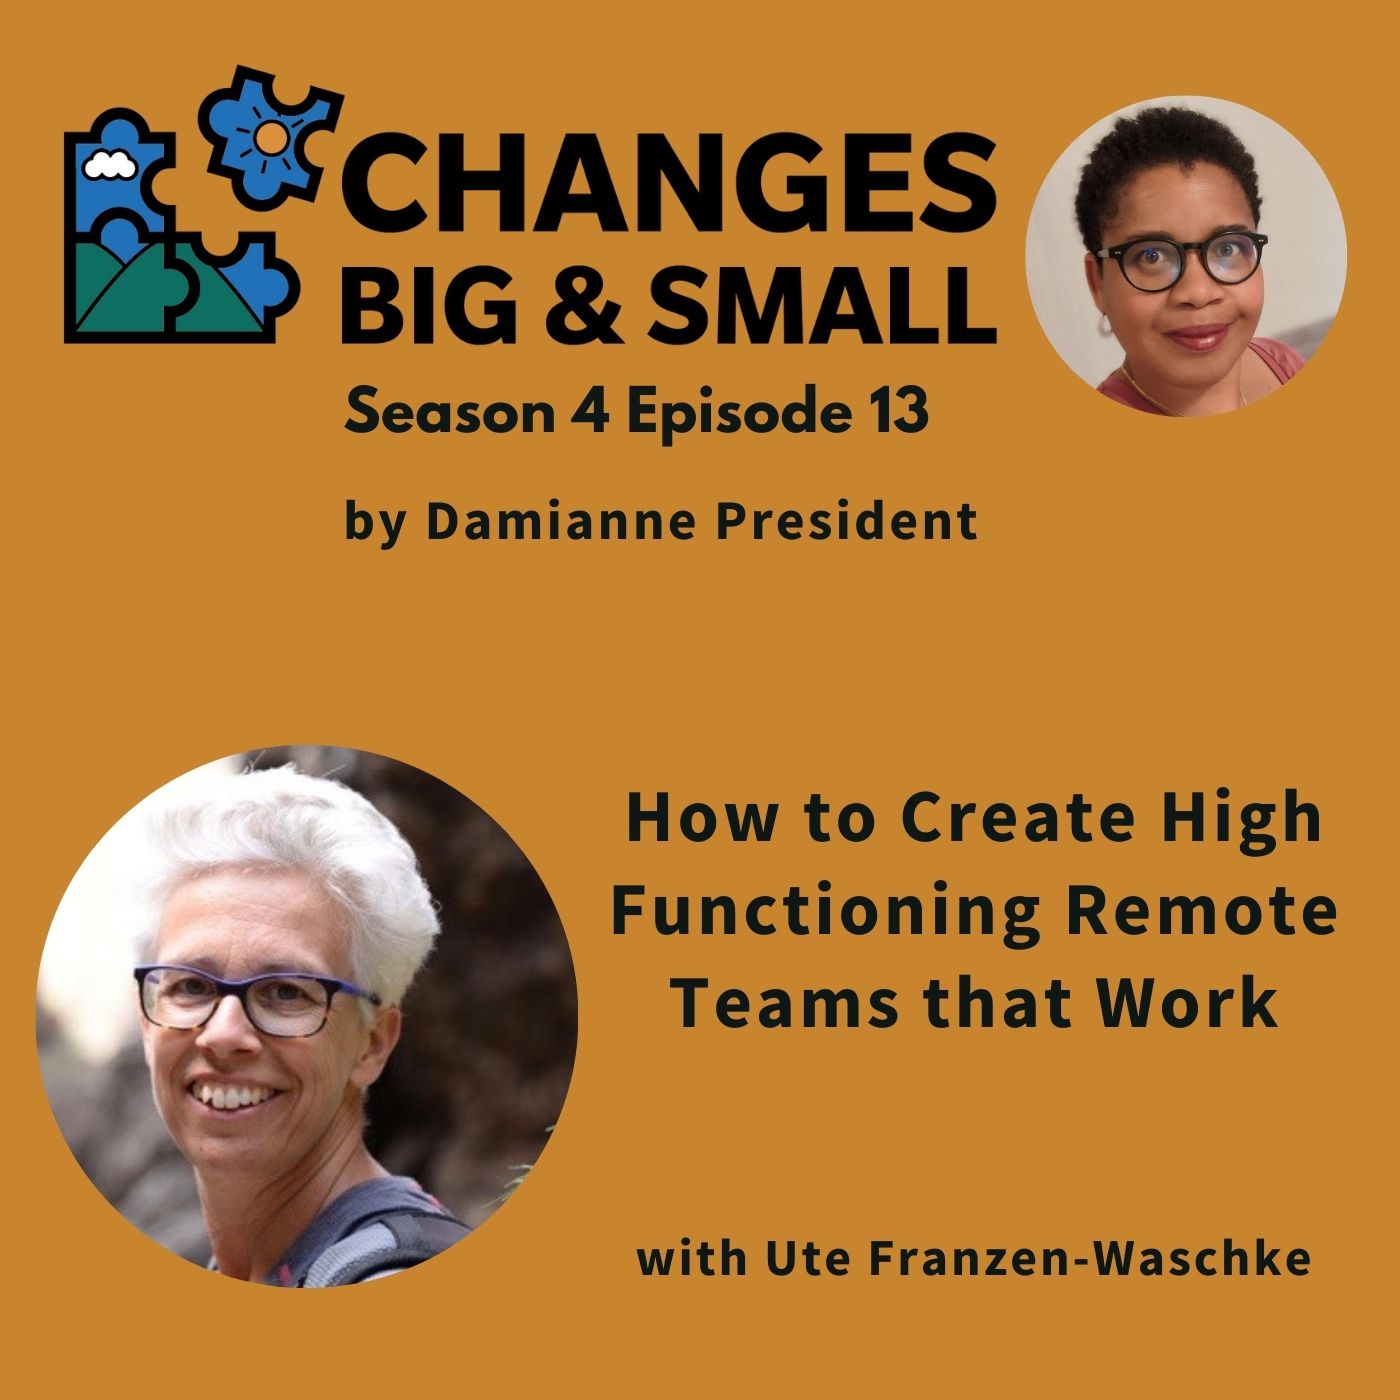 How to Create High Functioning Remote Teams that Work with Ute Franzen-Waschke